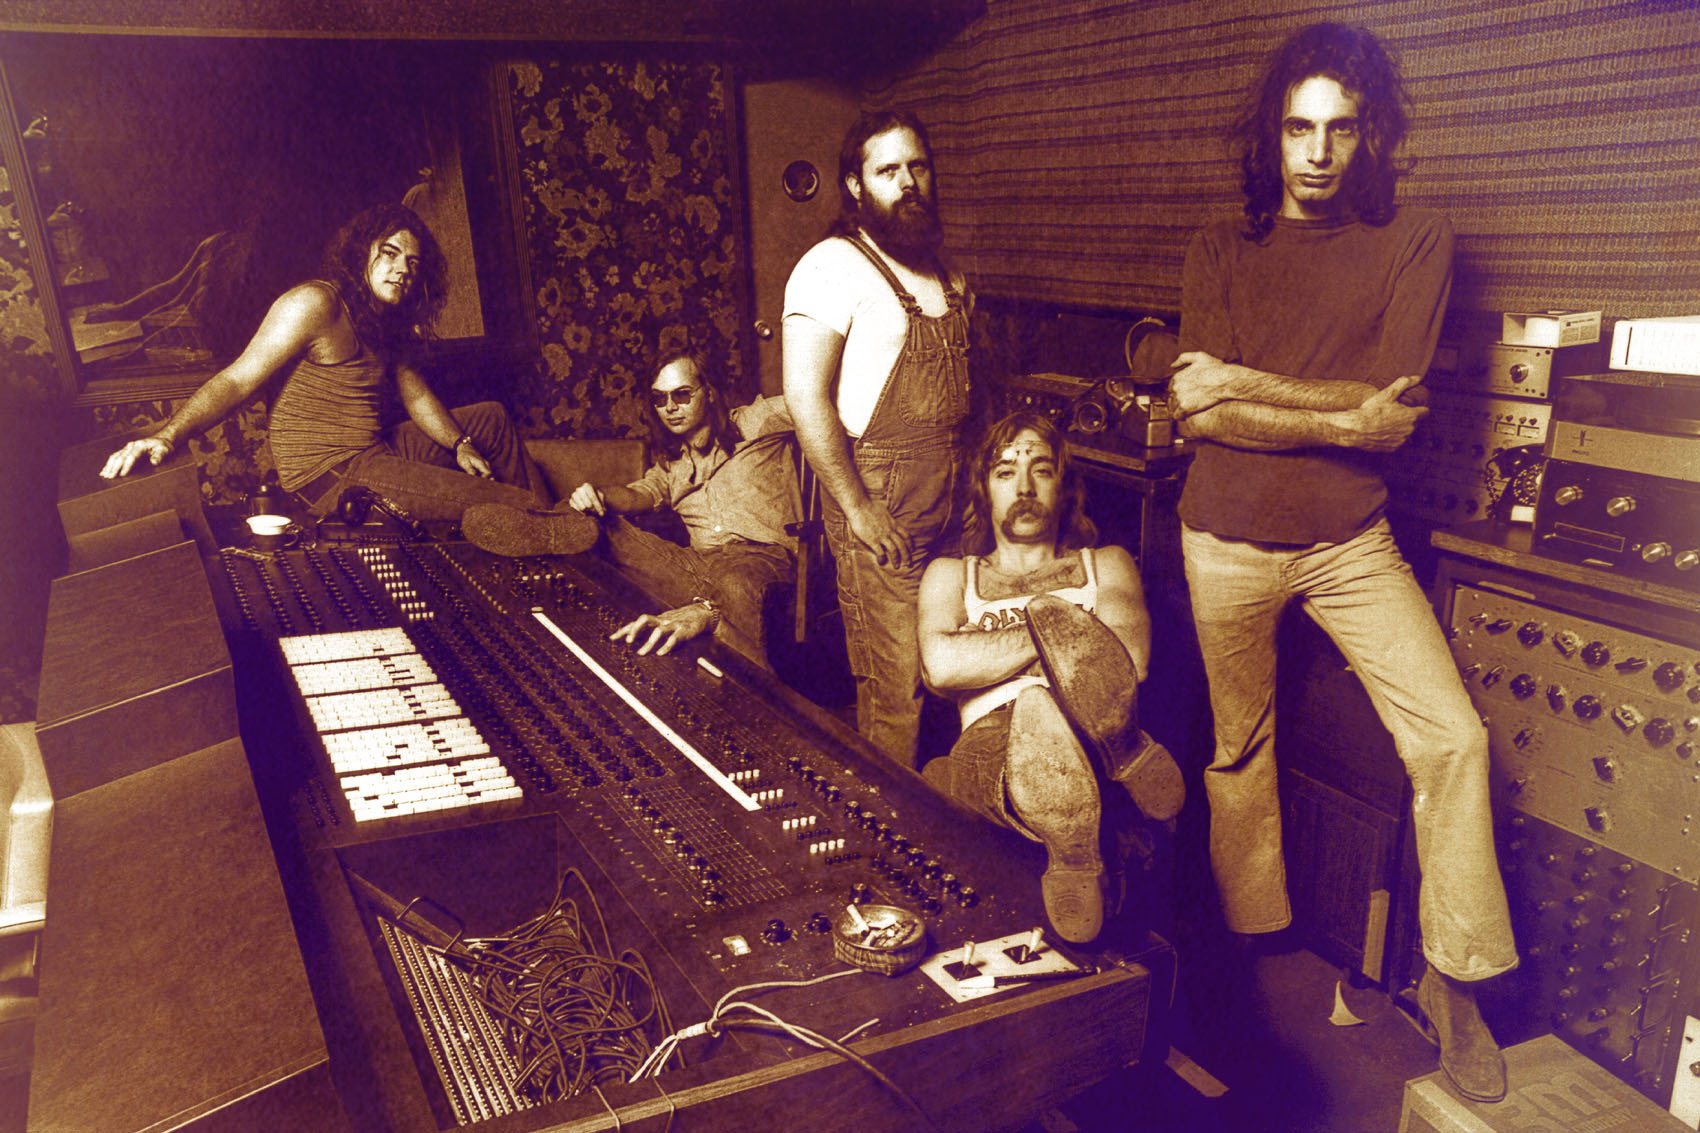 Steely Dan’s Cynical, Moody Masterpiece Hits Harder 40 Years Later